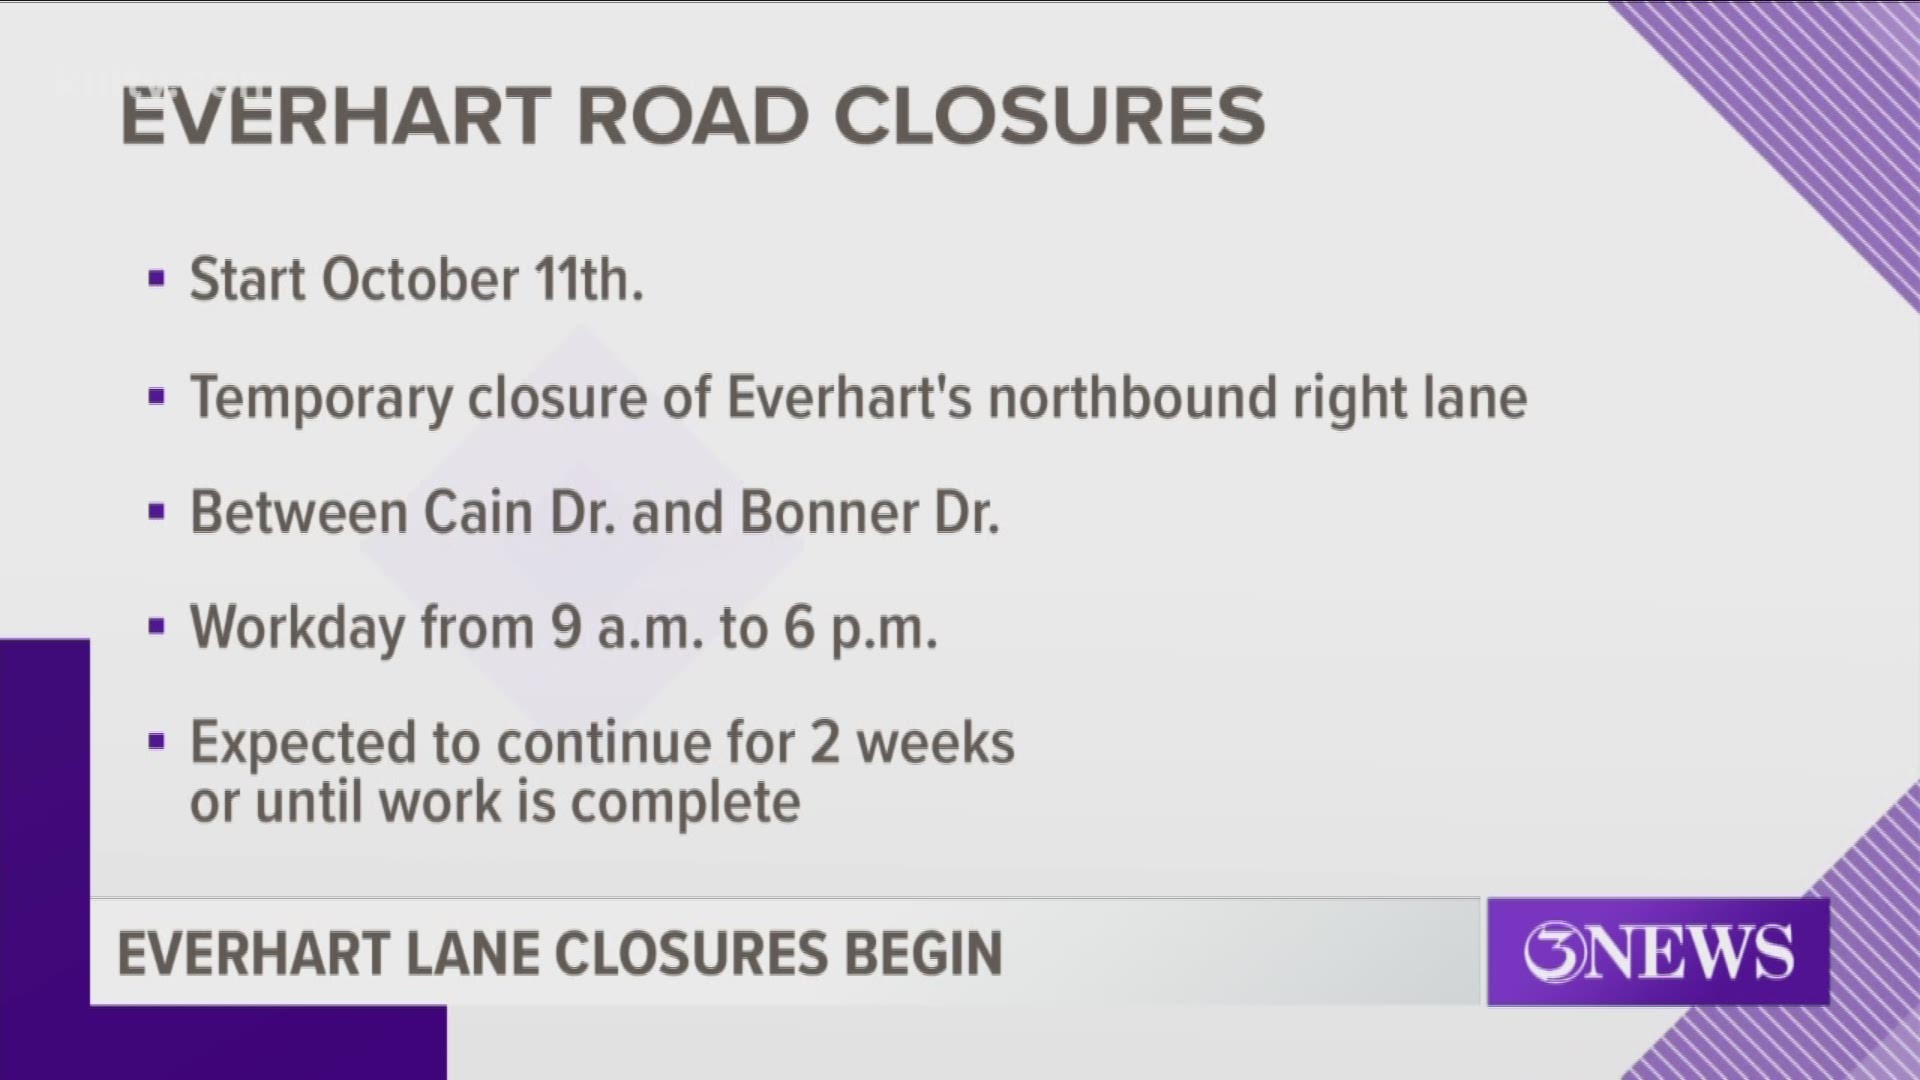 The closures will take place between 9 a.m.-6 p.m. each workday and are expected to continue for two weeks or until the work is complete.c